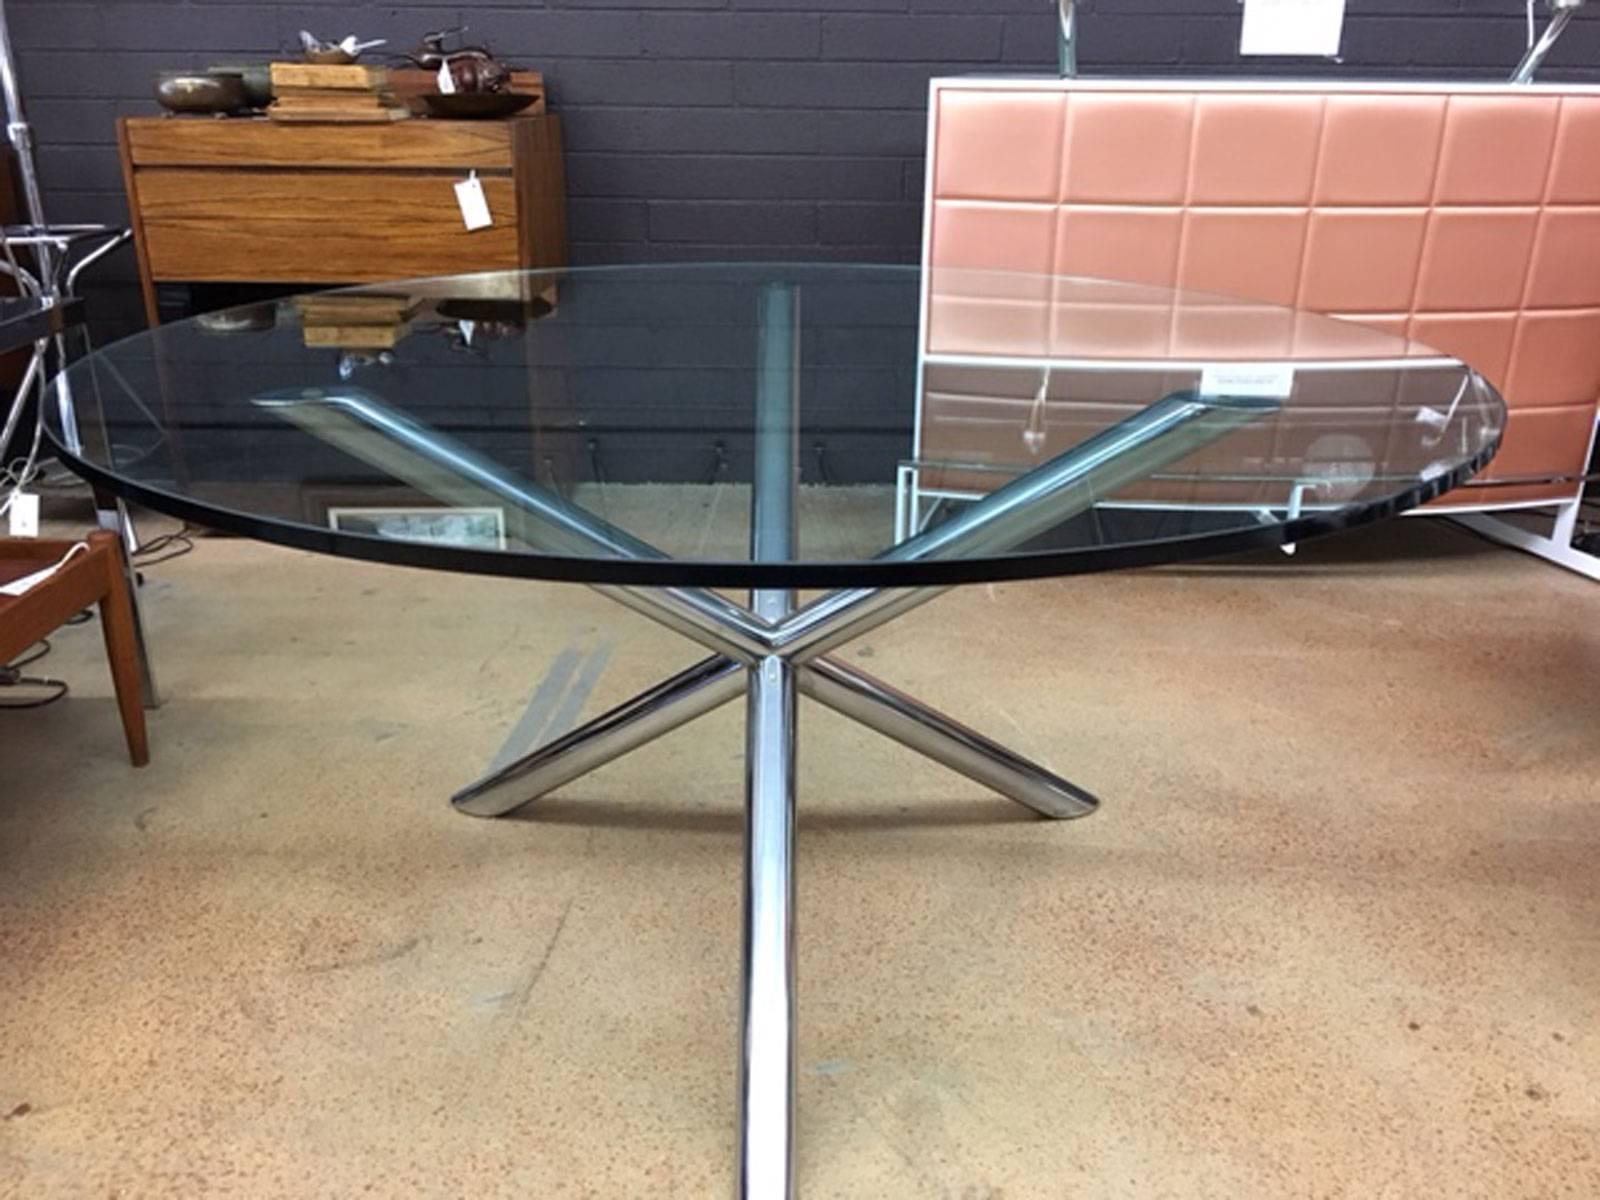 Jax dining table with heavy glass in the style of Milo Baughman. Truly nice table with an artistic Jax presentation.